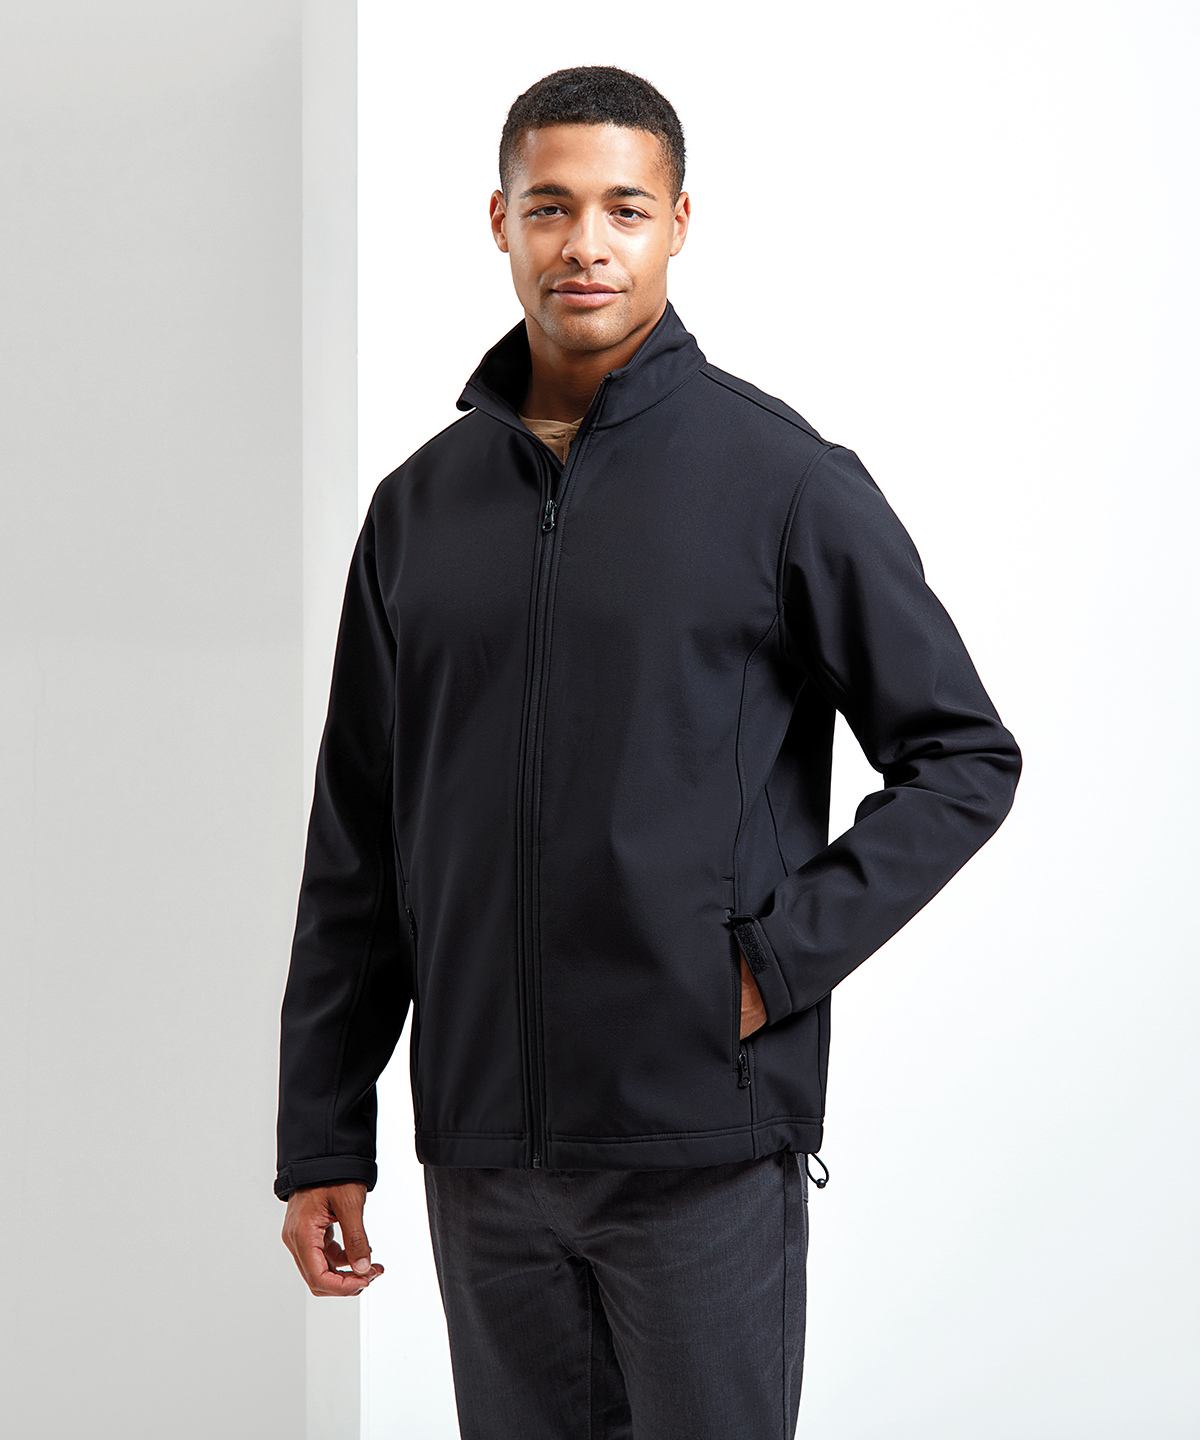 Windchecker® printable and recycled softshell jacket